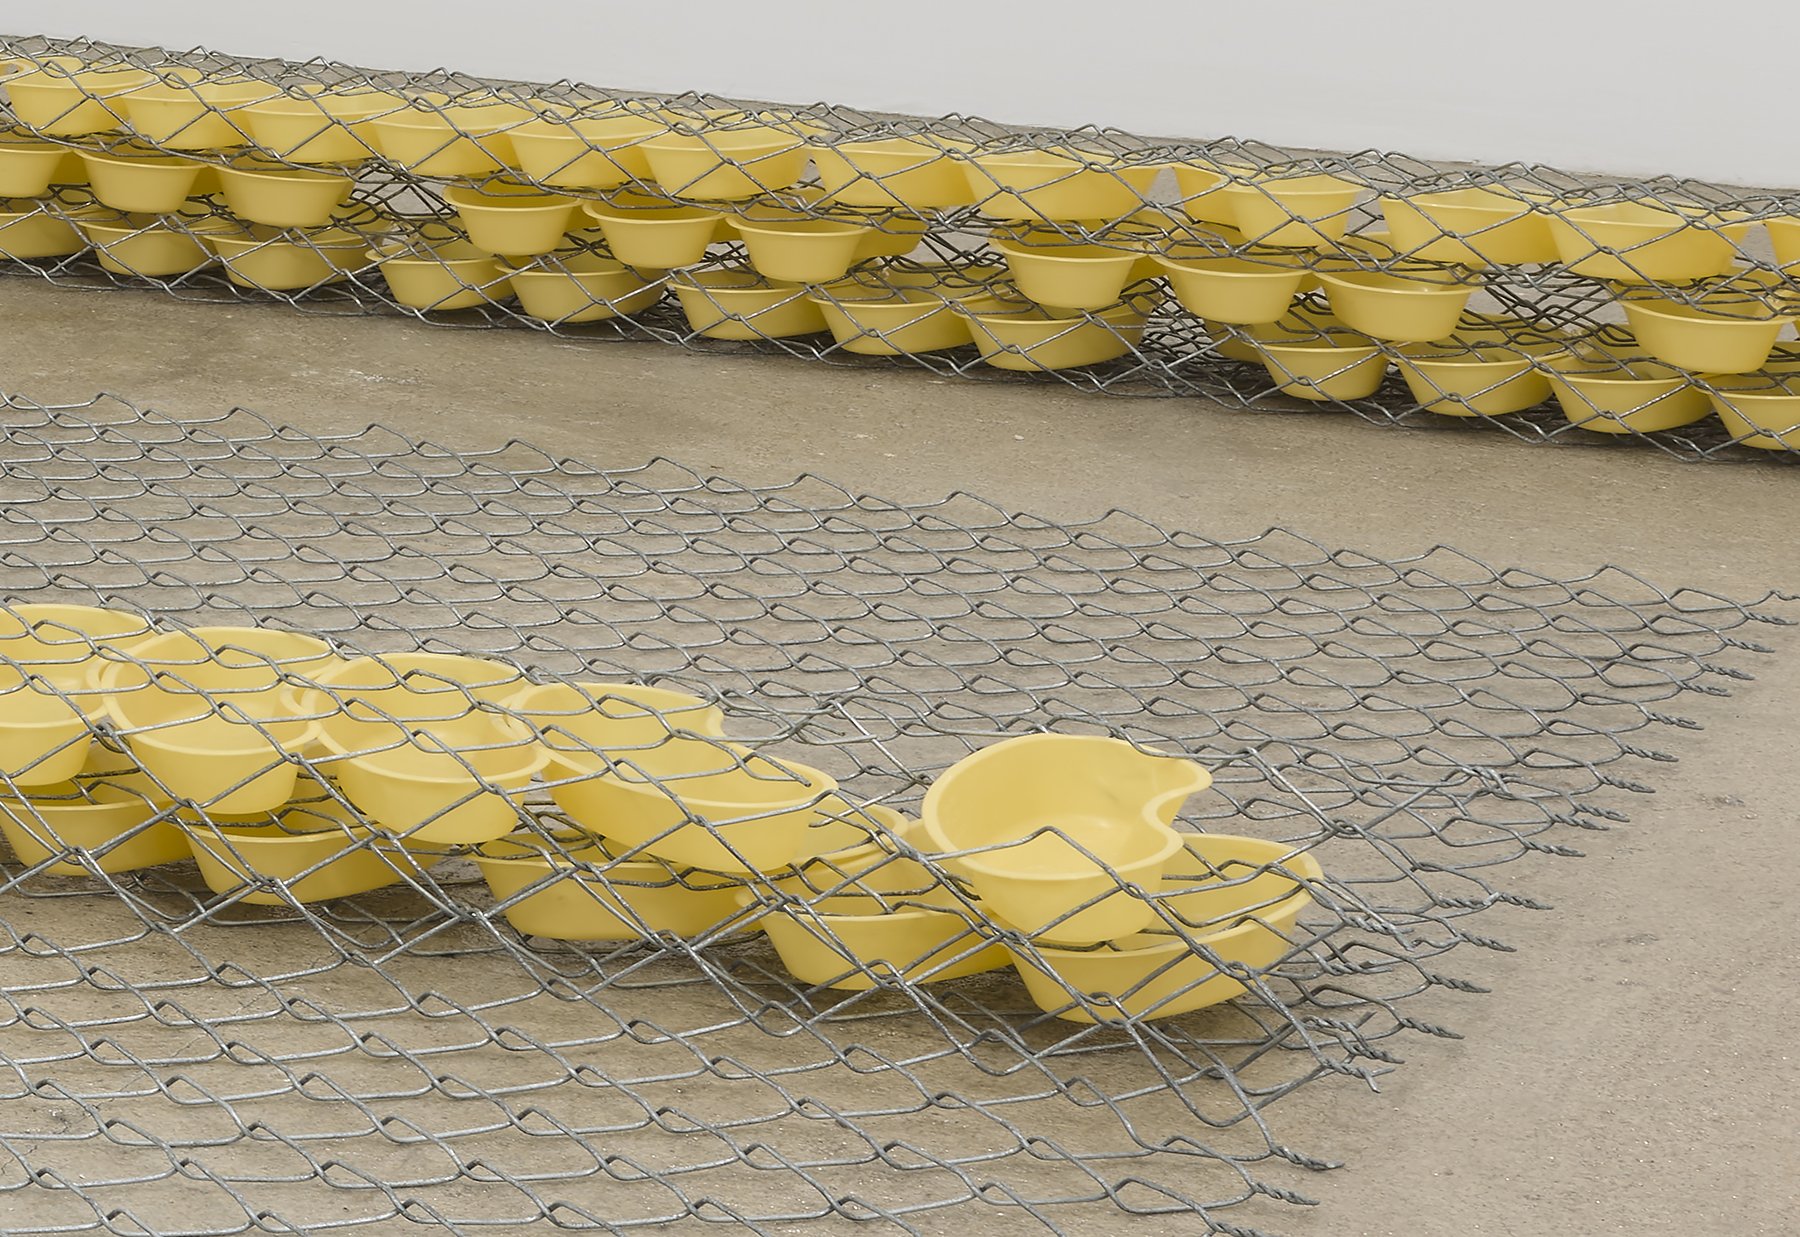  Bat-Ami Rivlin  Untitled (fence, bedpans) , 2021 (detail) chain link fencing, yellow kidney basins  8 x 120 x 72 inches (20 x 305 x 183 cm)  (BR21) 